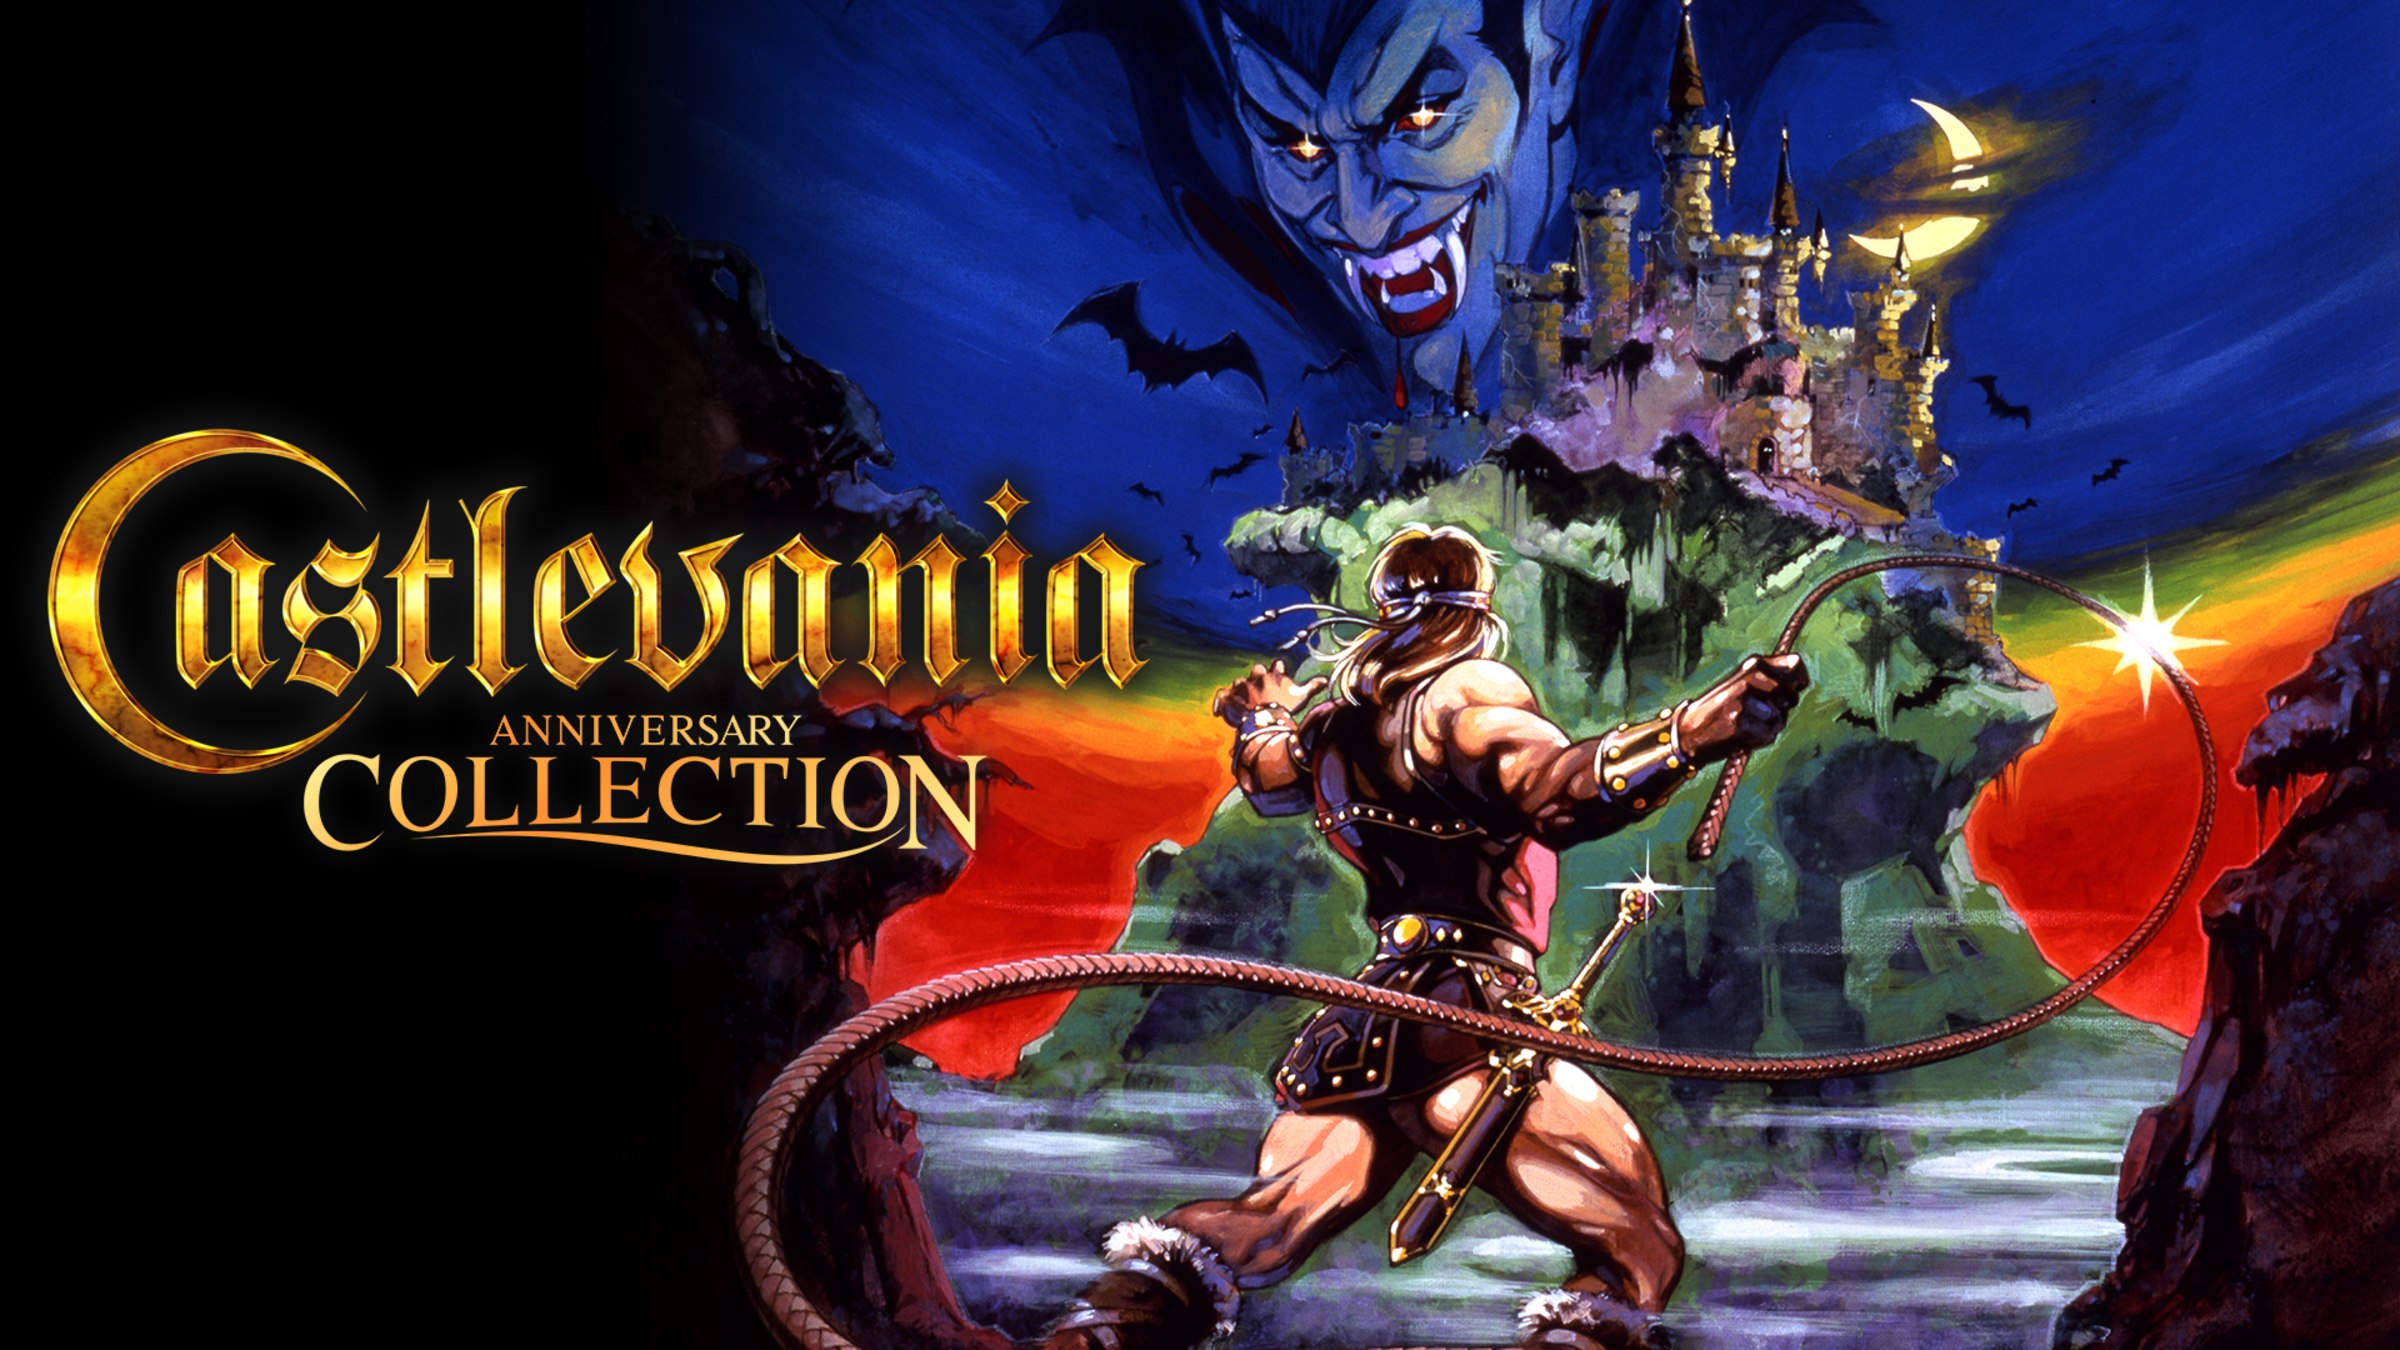 Hey Castlevania Fans, excited to share publisher Merge Games and